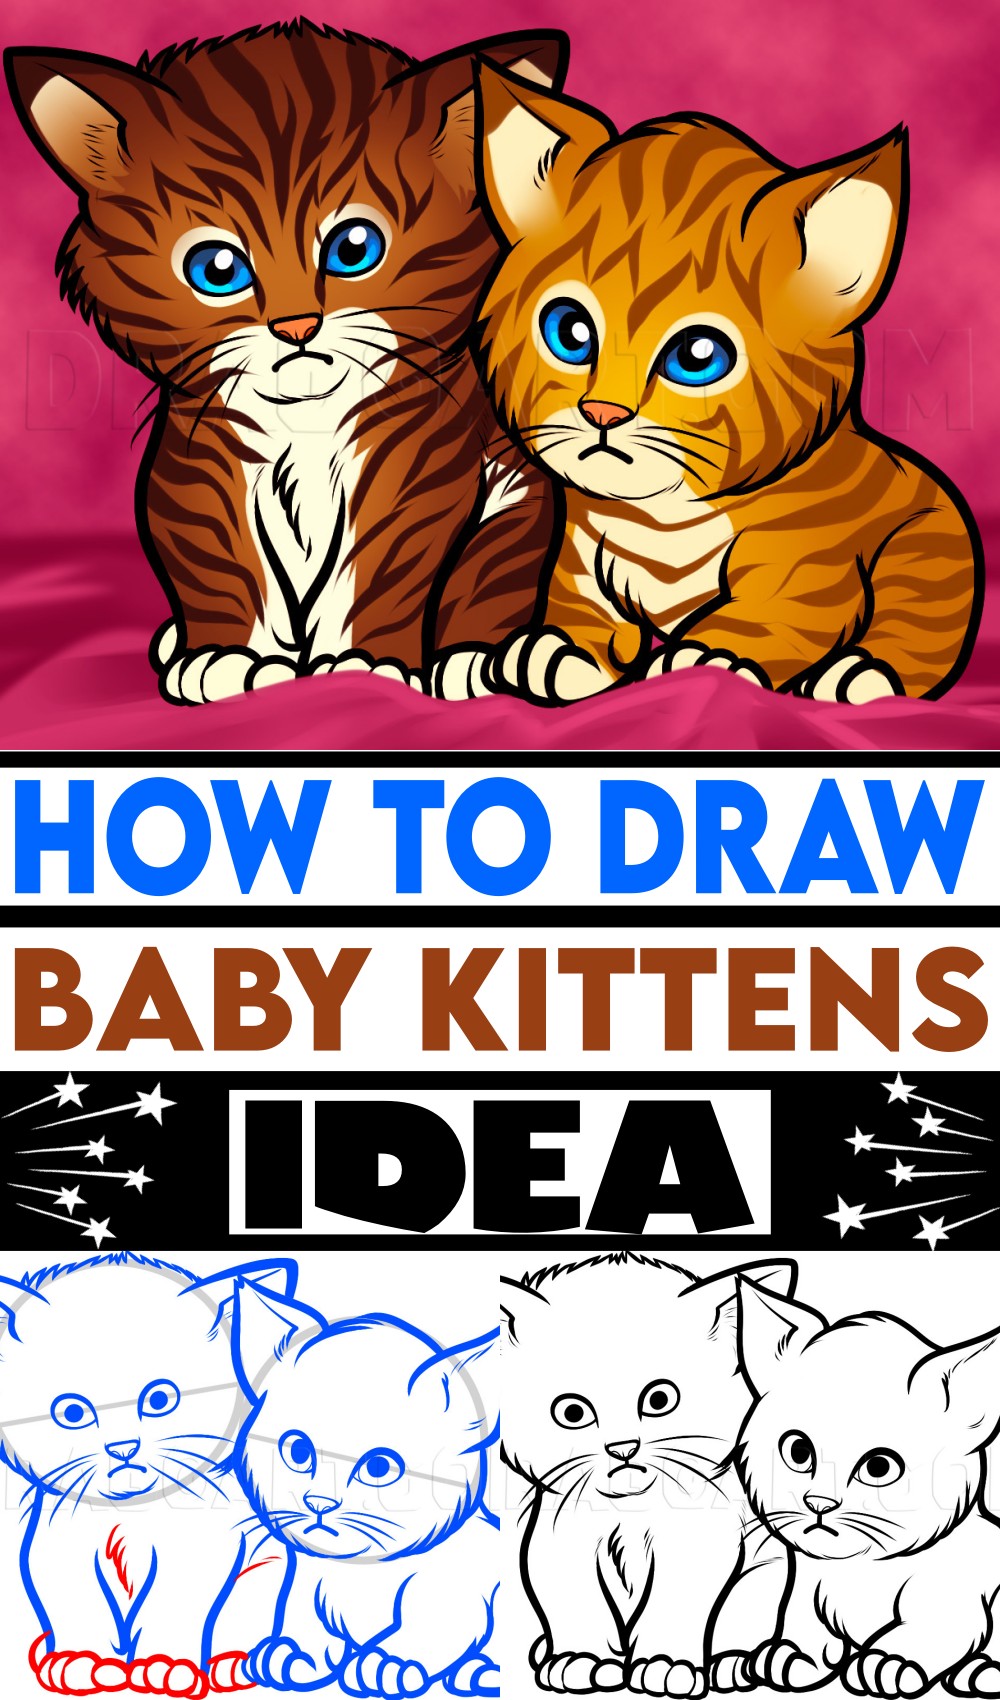 How To Draw Baby Kittens